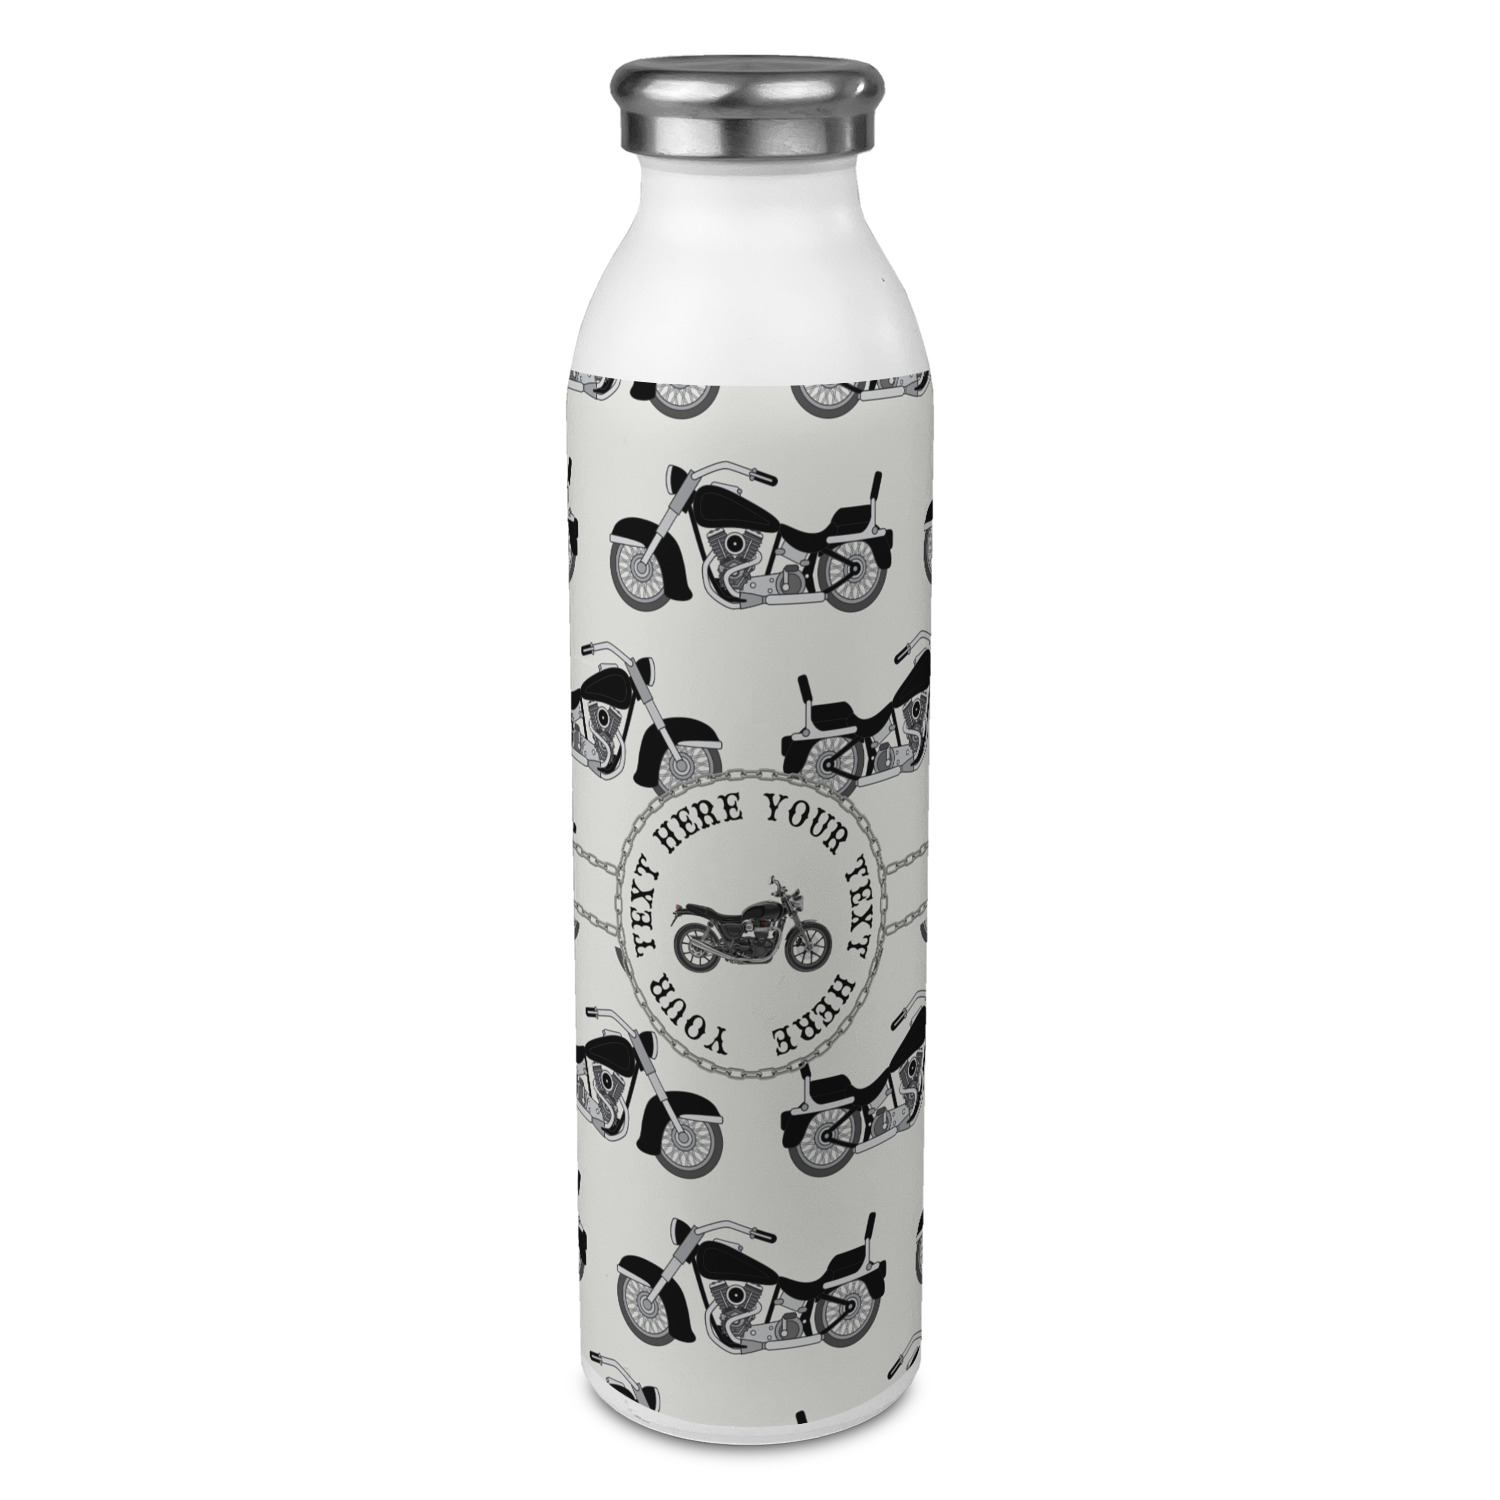 https://www.youcustomizeit.com/common/MAKE/2670515/Motorcycle-20oz-Water-Bottles-Full-Print-Front-Main.jpg?lm=1665527548